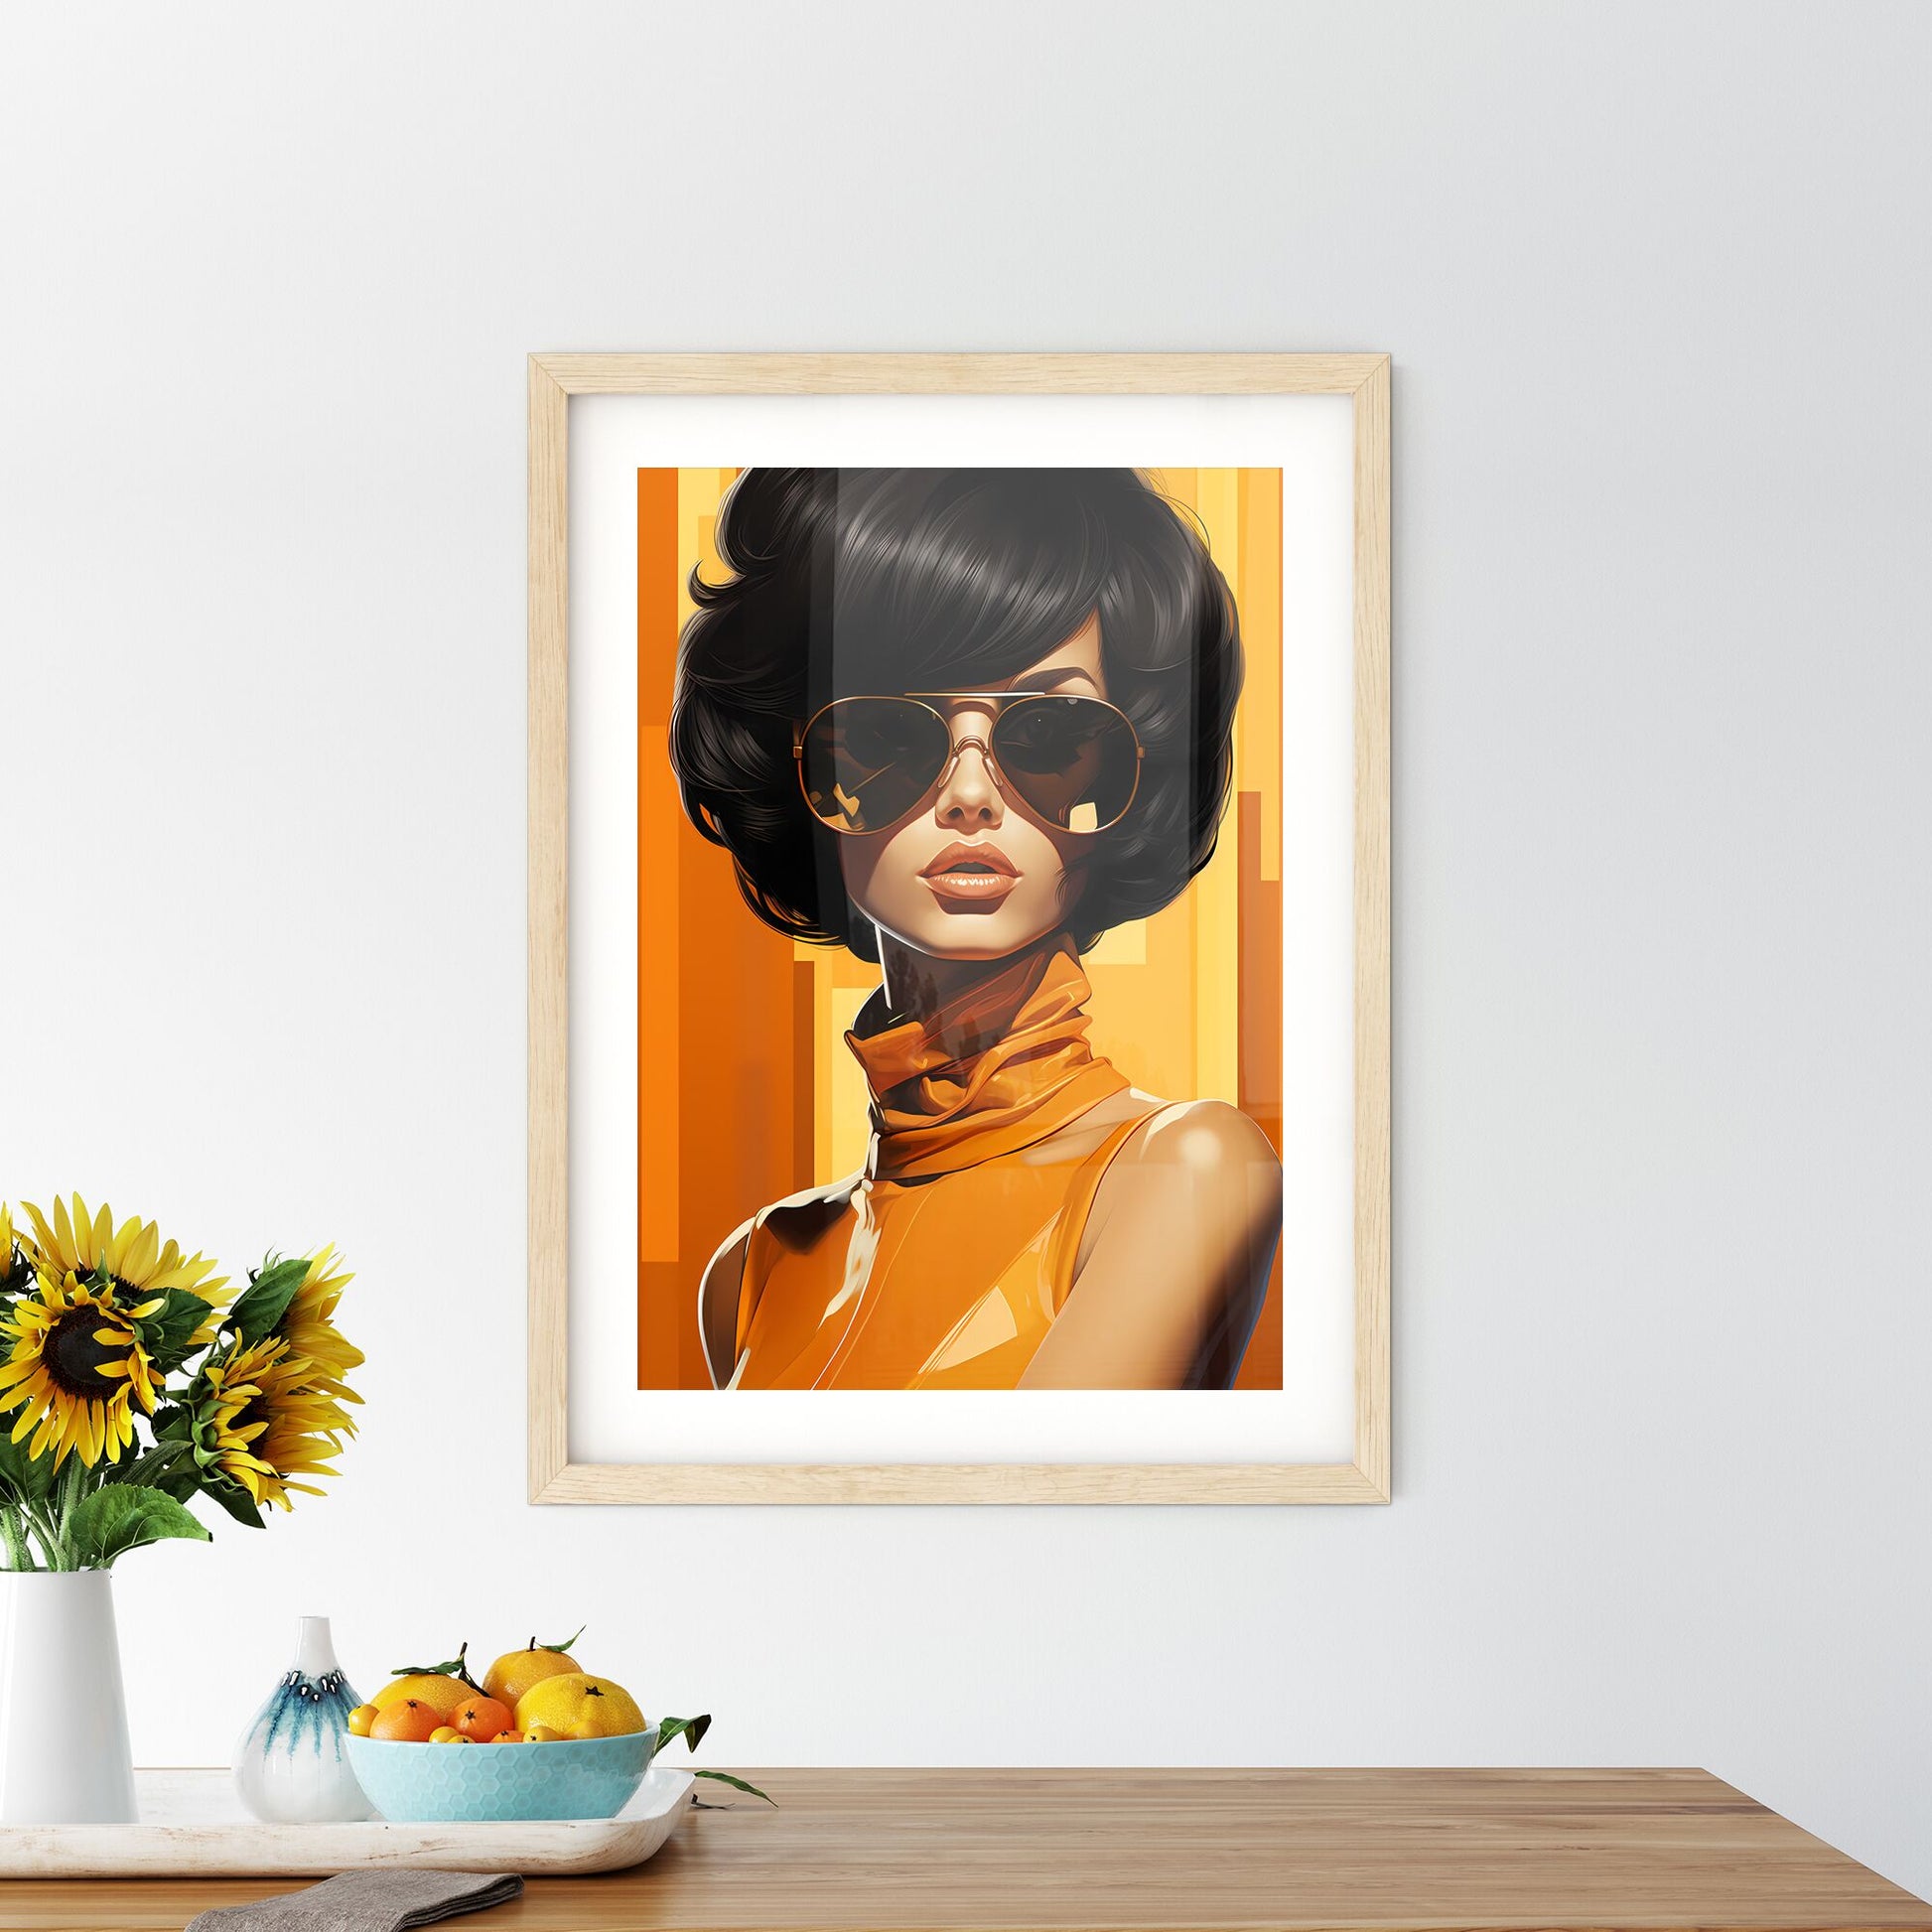 70's - A Woman With Short Black Hair Wearing Sunglasses Default Title